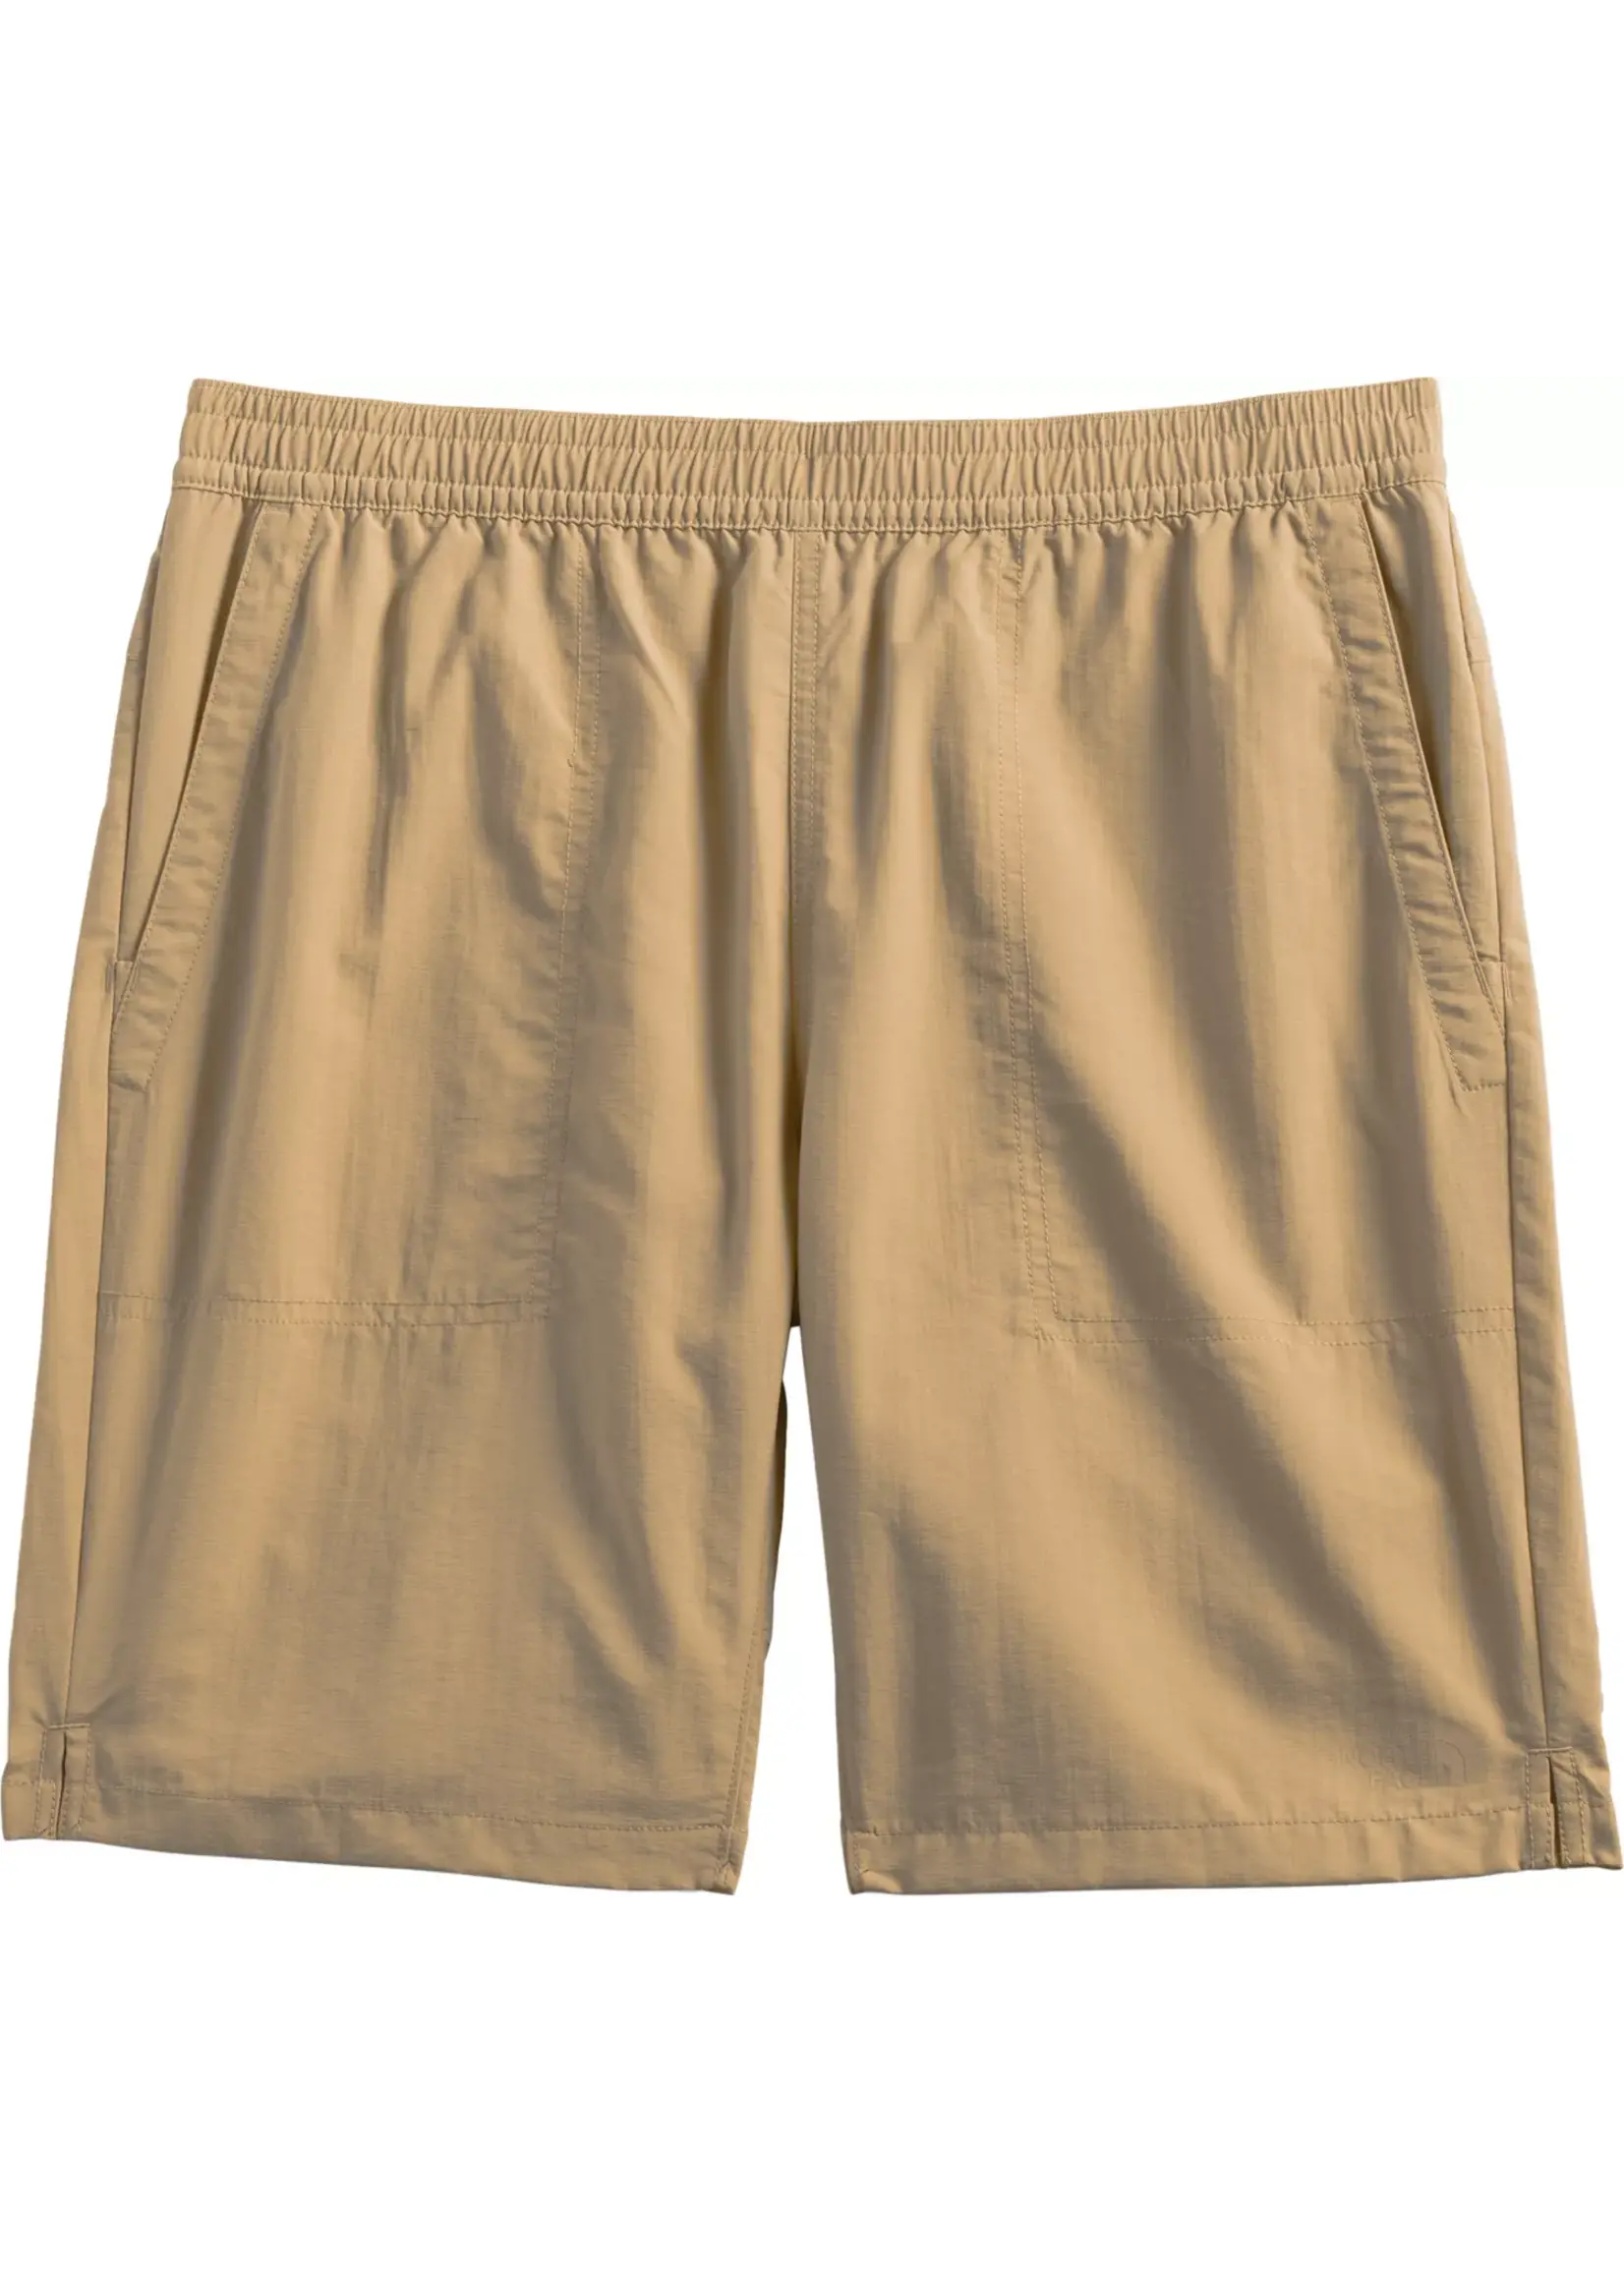 North Face North Face M's Pull-On Adventure Short